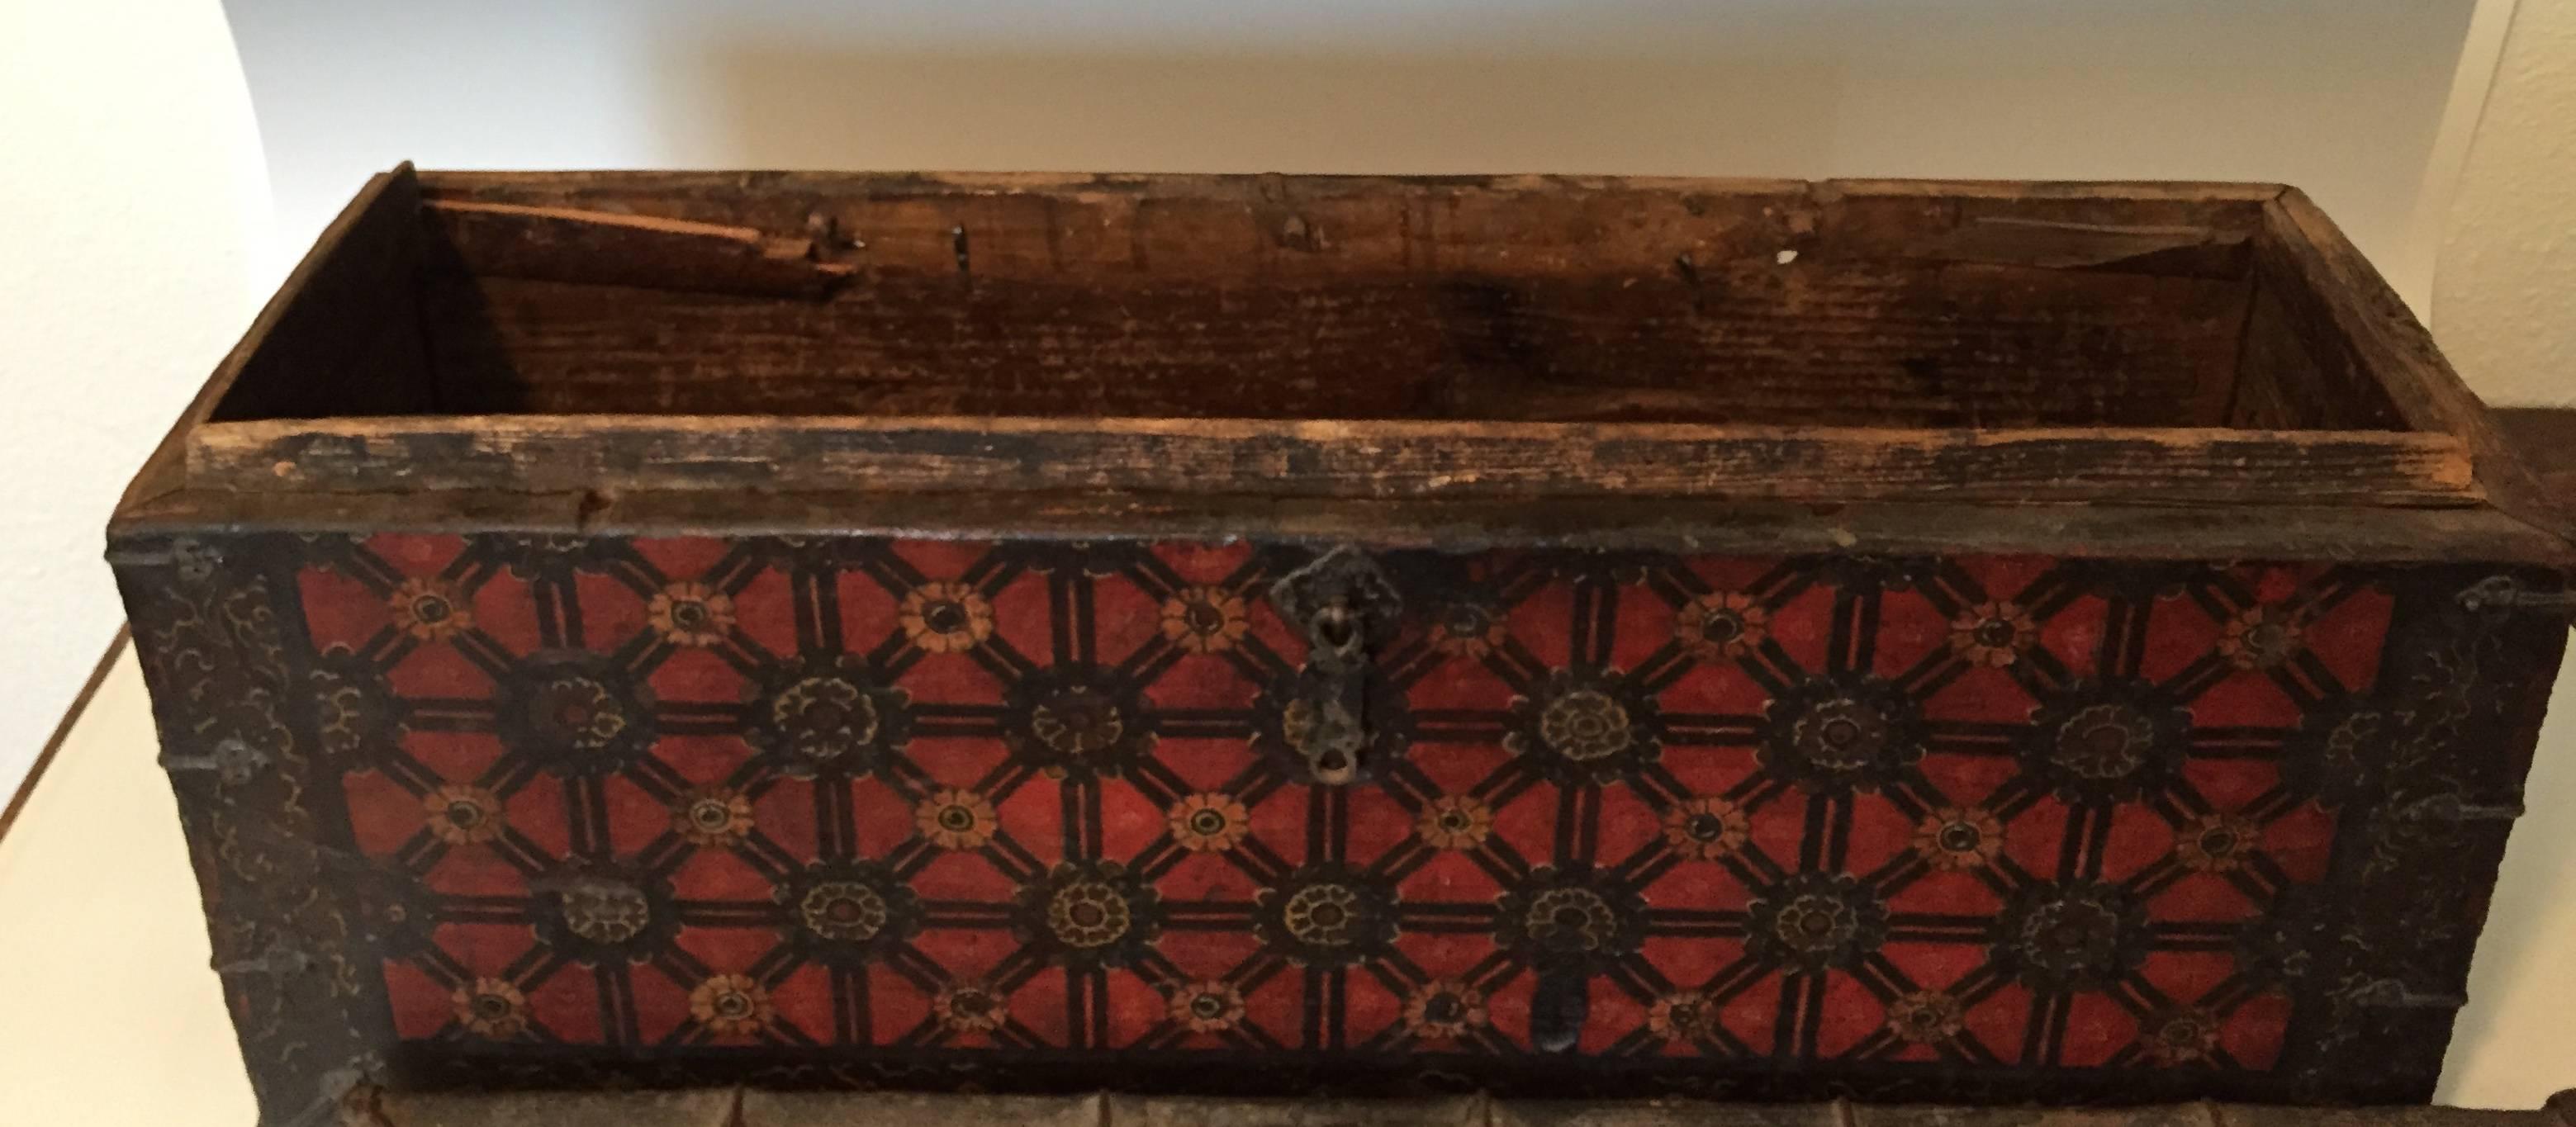 
Here is an ancient Tibetan wedding trunk from the 19th century or earlier. All original lacquer, paint and hardware. The front is painted with a flower motif. The lid lifts off (hinges are off). Each side has original metal handles.
Measures: 13